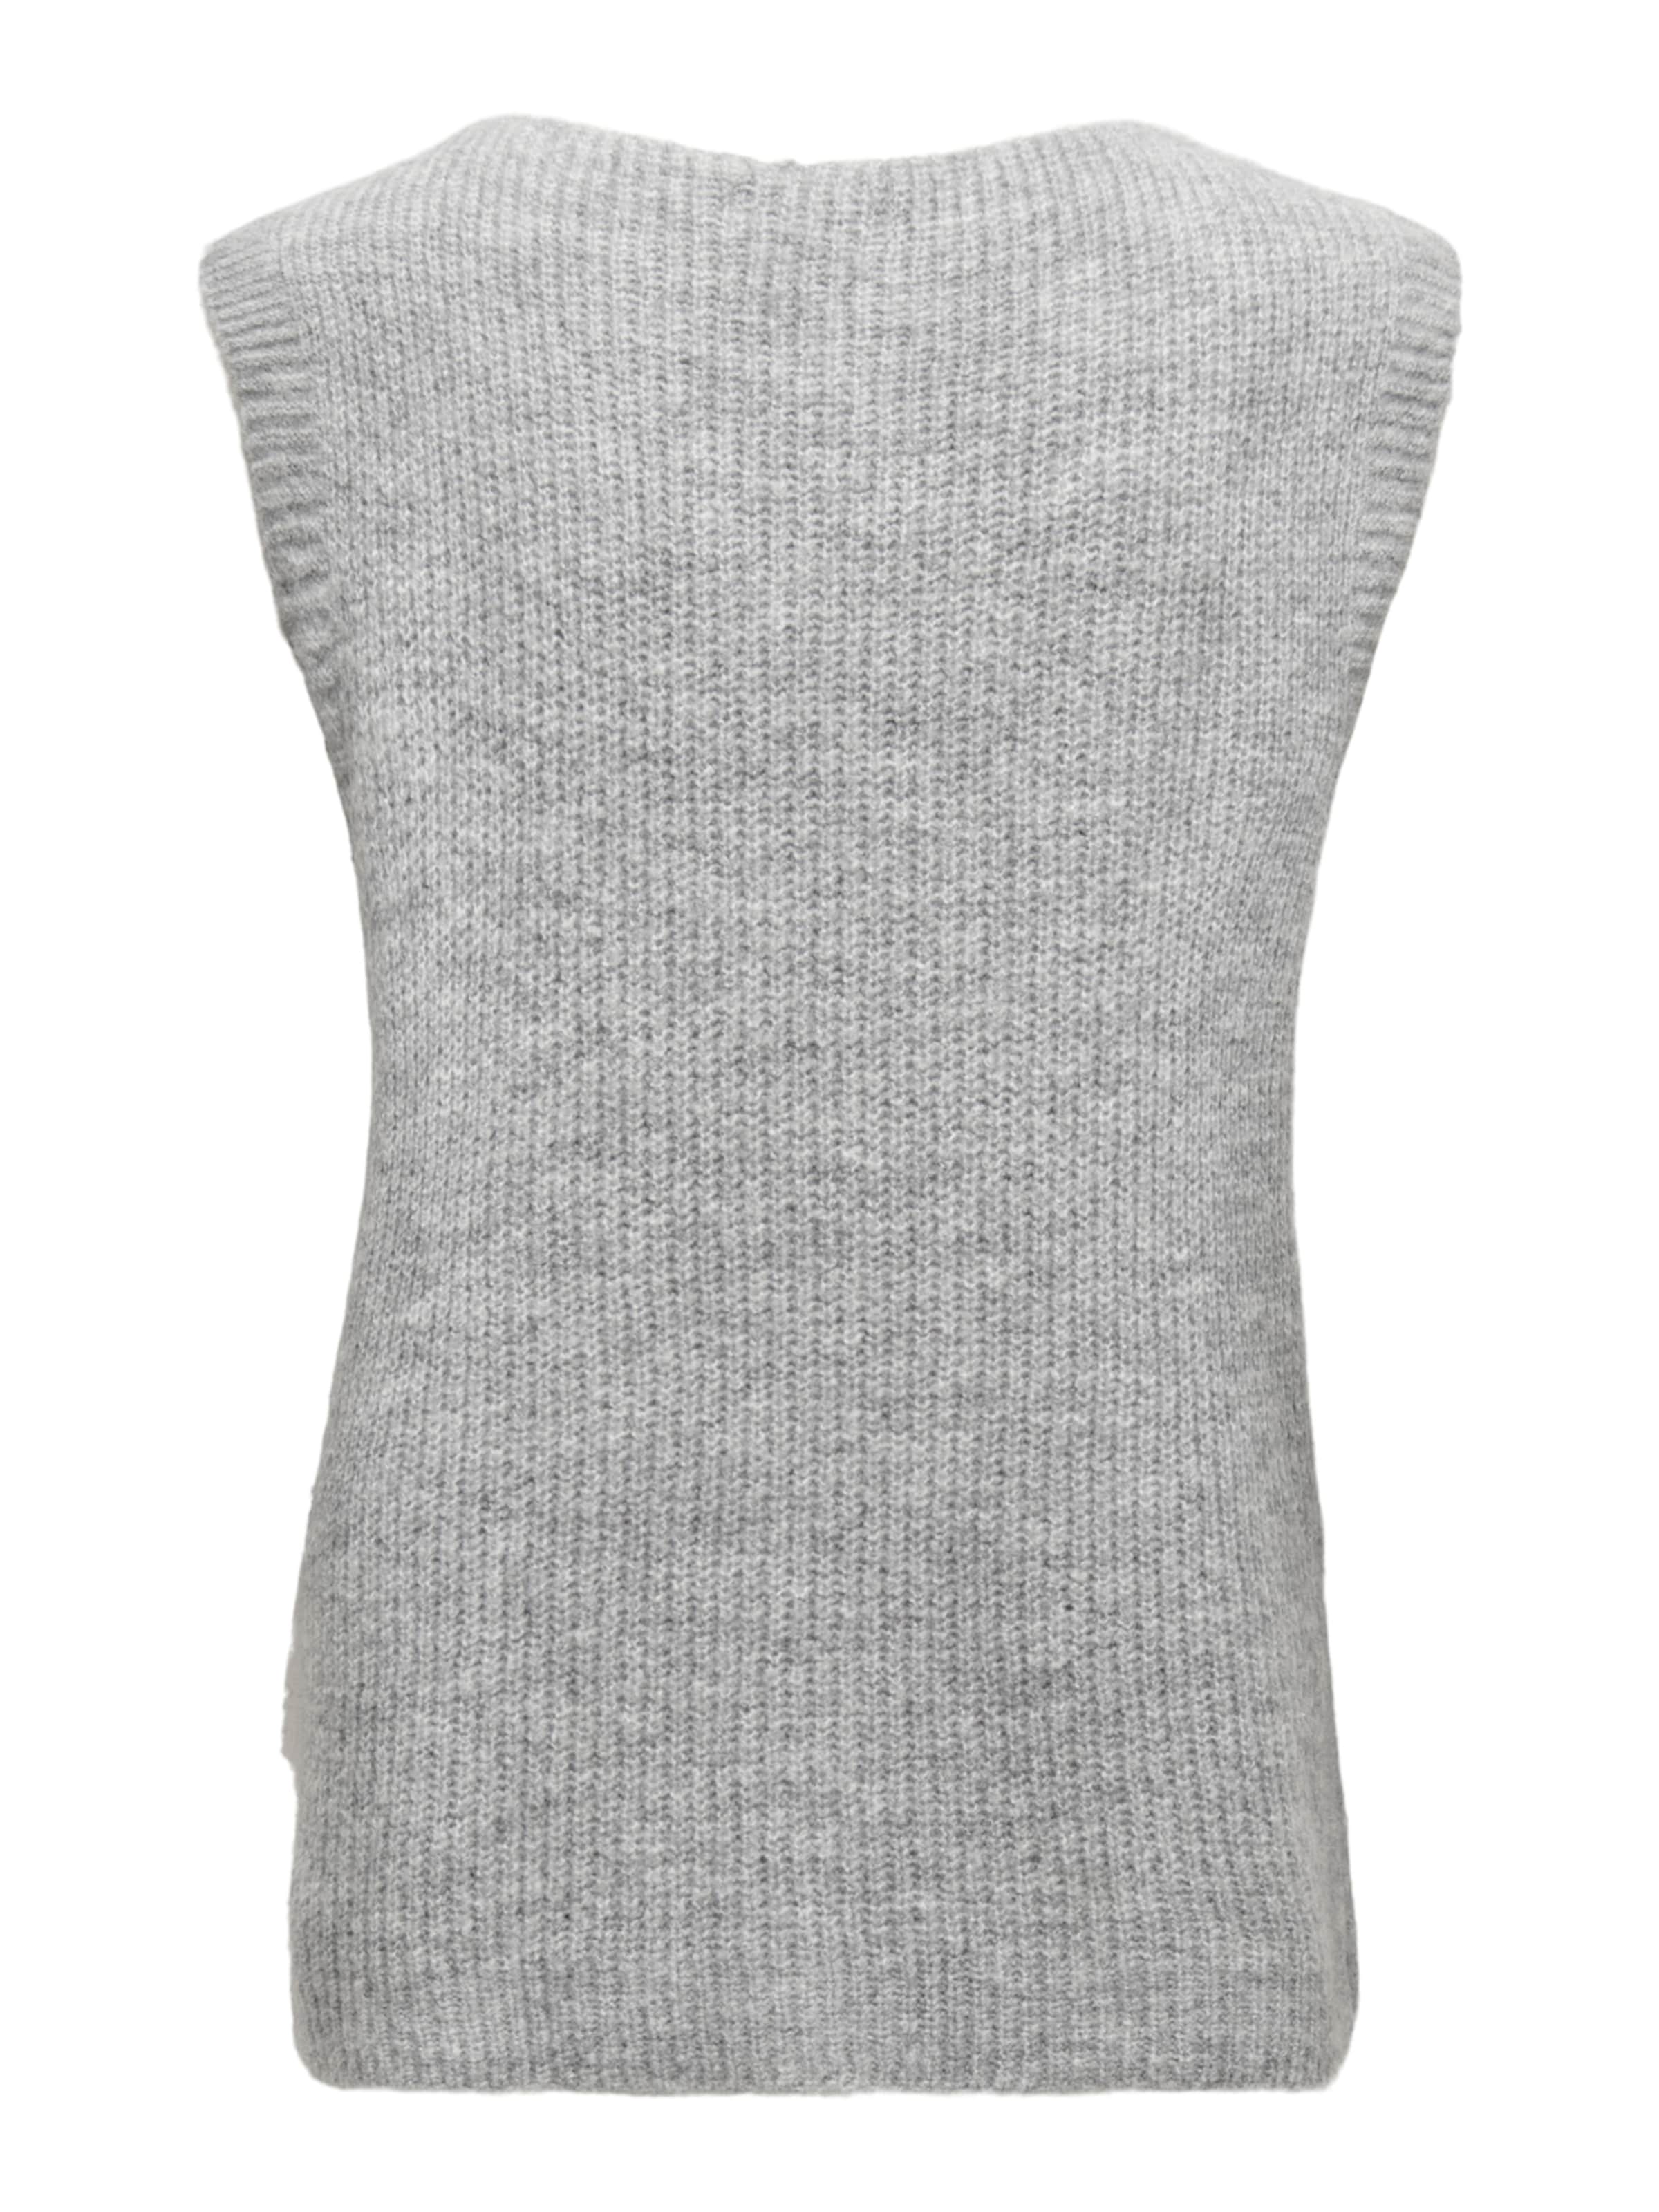 Femme Pull-over Cora ONLY en Gris Clair 